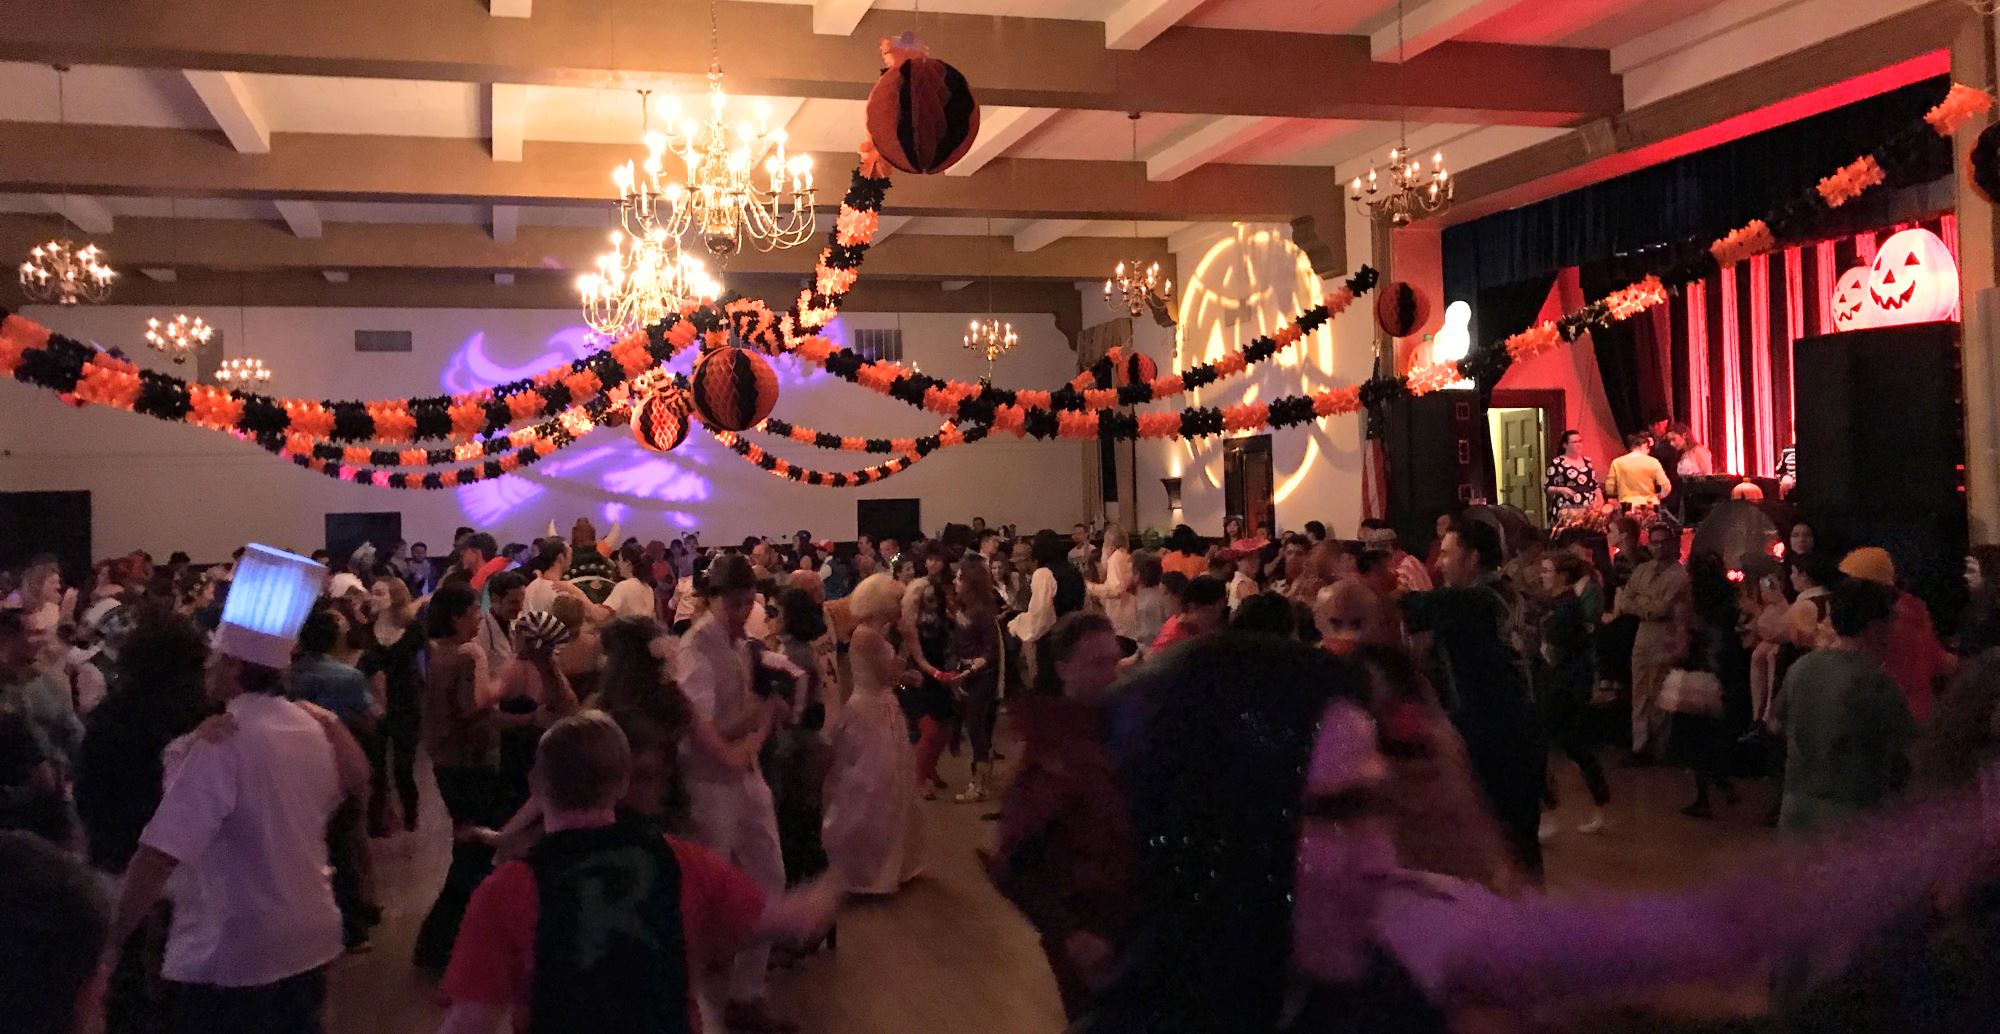 LindyGroove’s 20th annual Haunted Halloween Ball